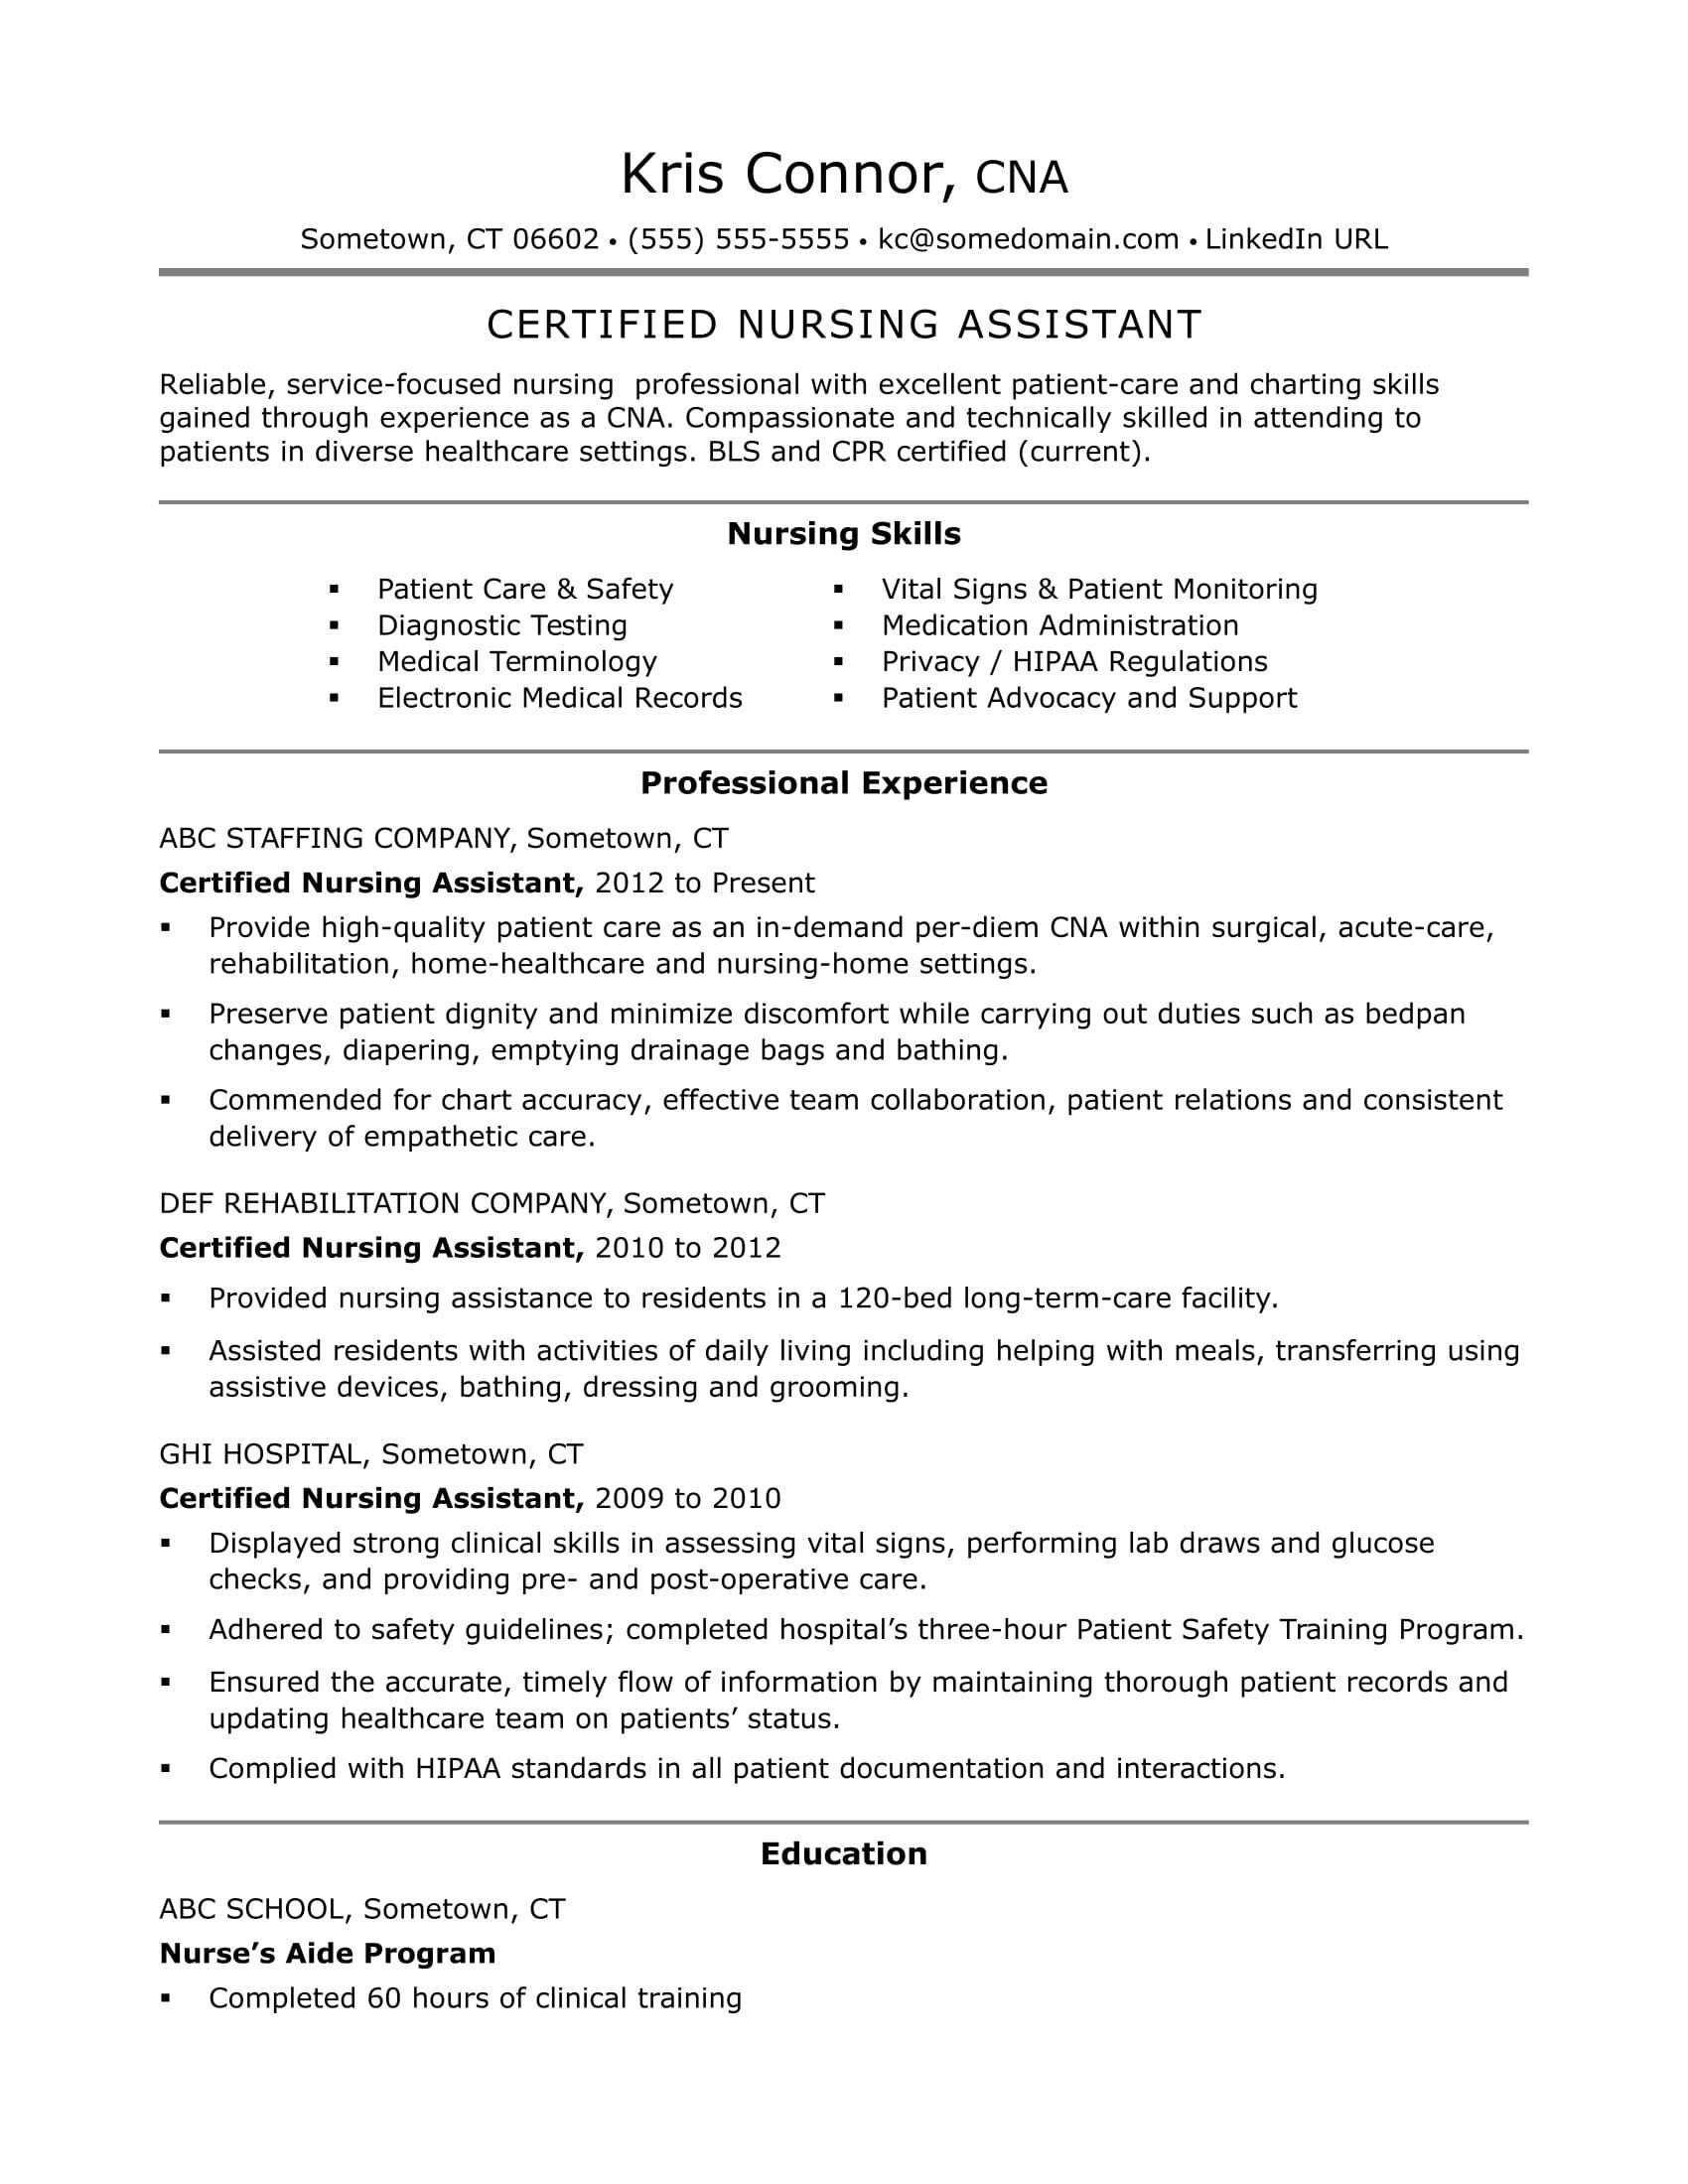 Samples Of Resume for A Cna Pin On Cna